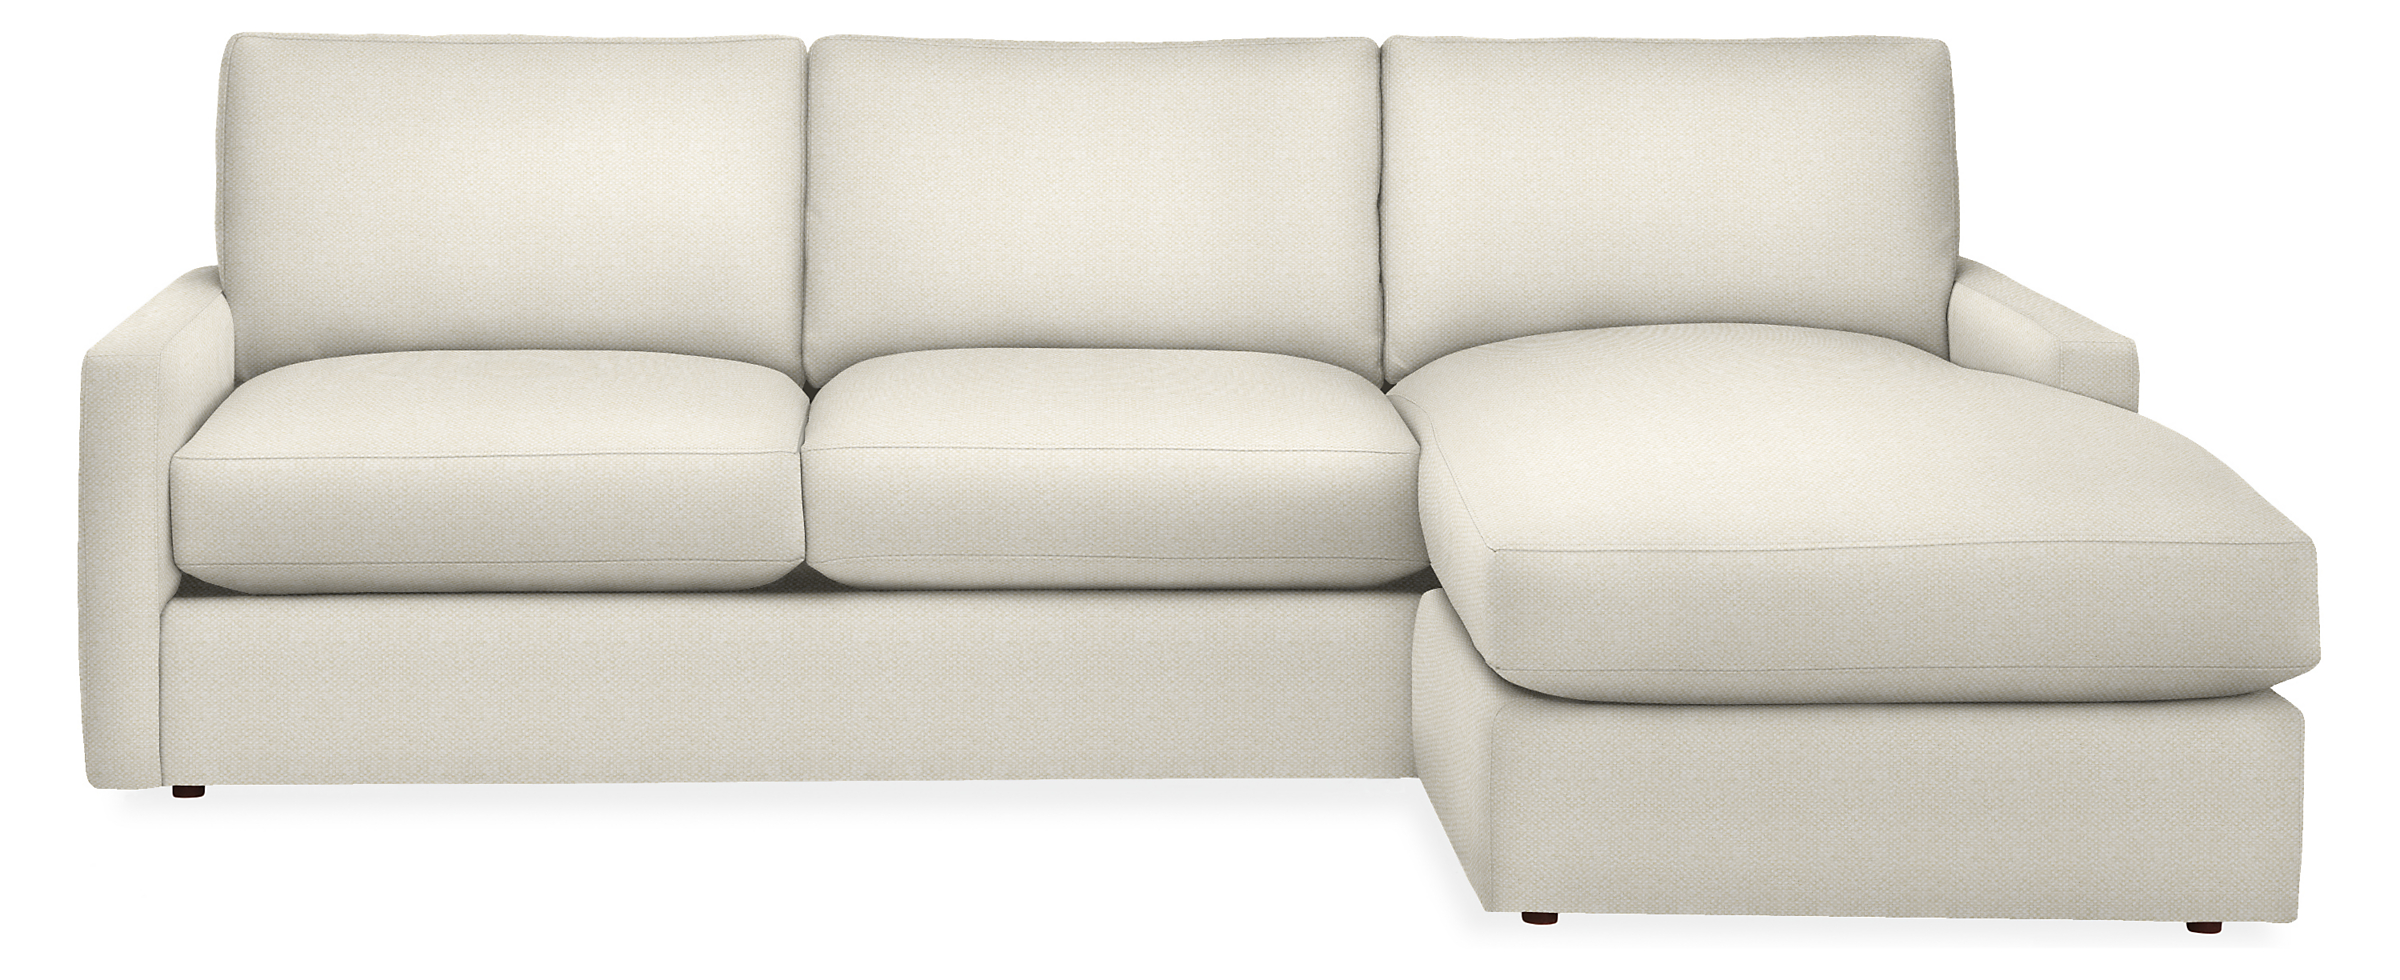 Linger 91" Sofa with Reversible Chaise in Arin Ivory